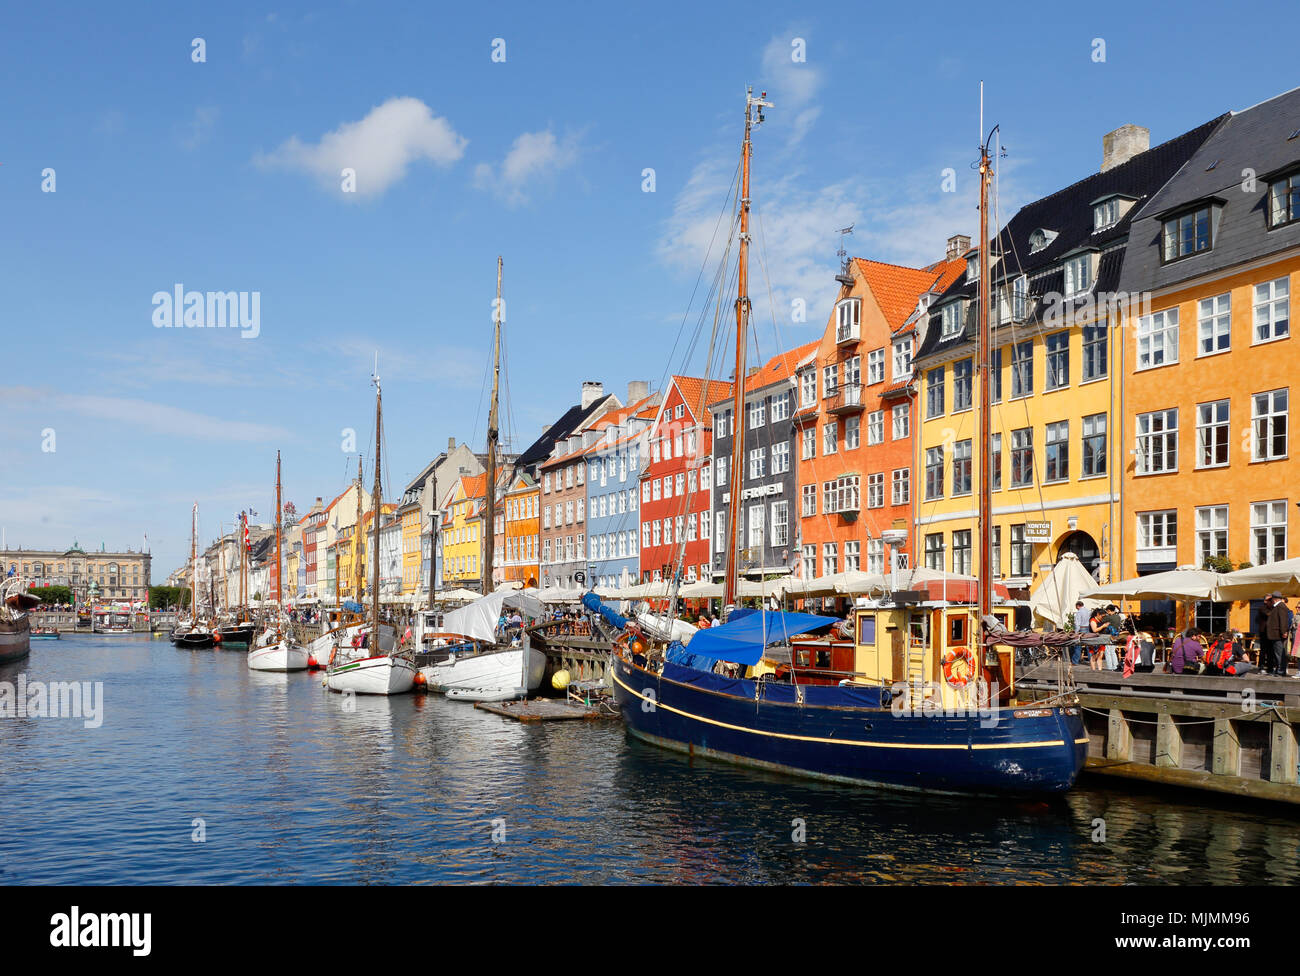 Copenhagen, Denmark - August 24, 2017: View of the canal in front of the colorful buildings with restaurants in Nyhavn. Stock Photo